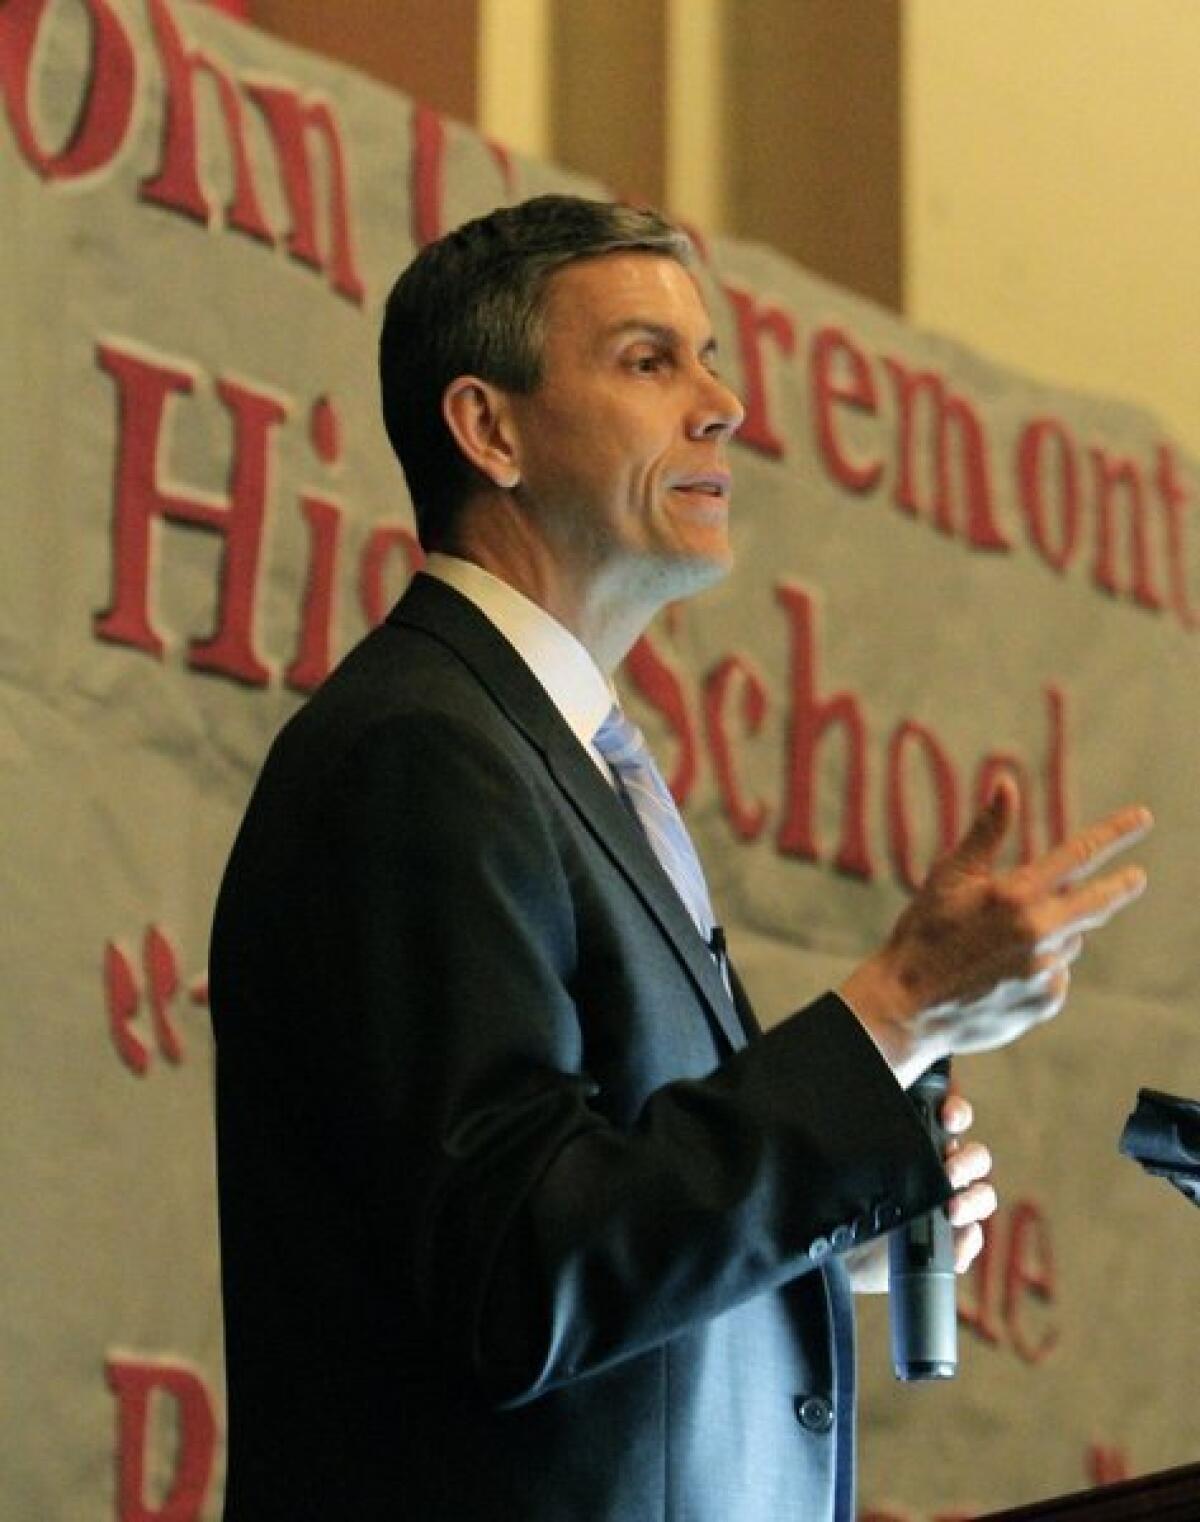 U.S. Education Secretary Arne Duncan during a 2011 visit to a Los Angeles campus. He rejected California's request for relief from sanctions affecting schools.